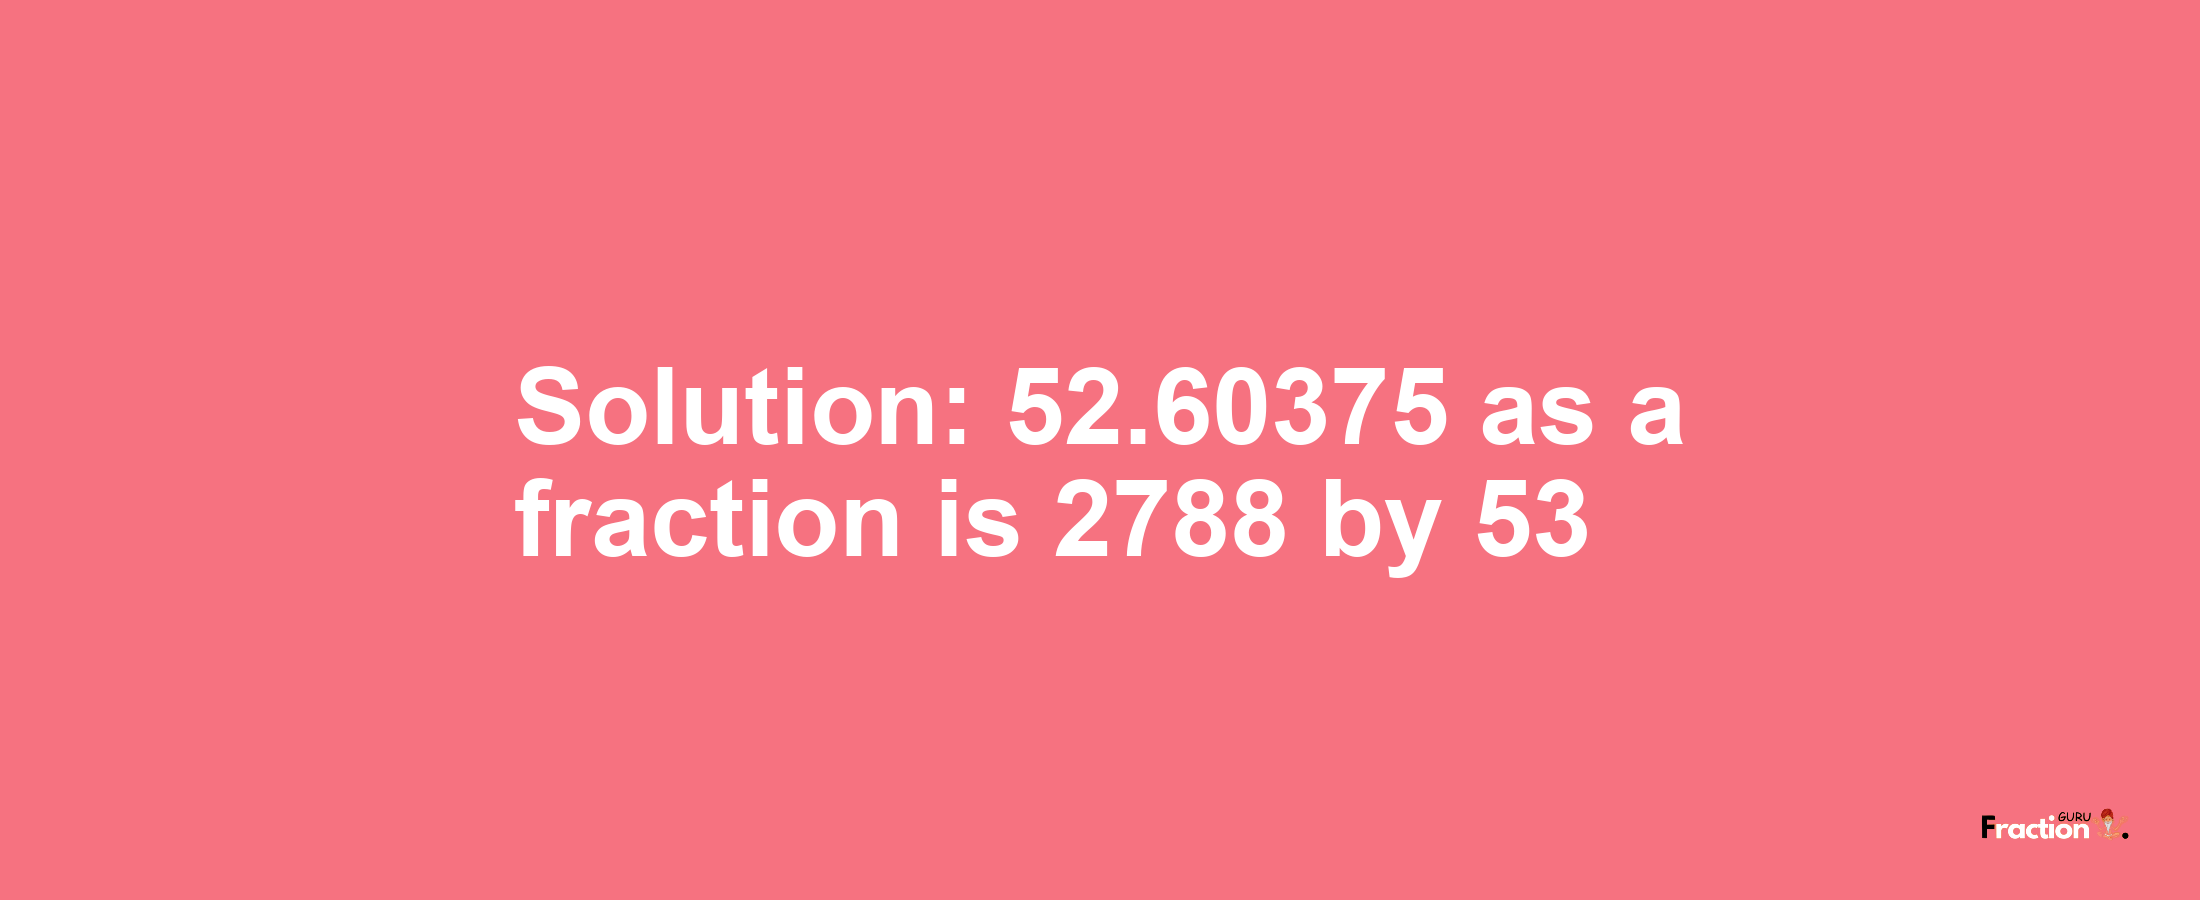 Solution:52.60375 as a fraction is 2788/53